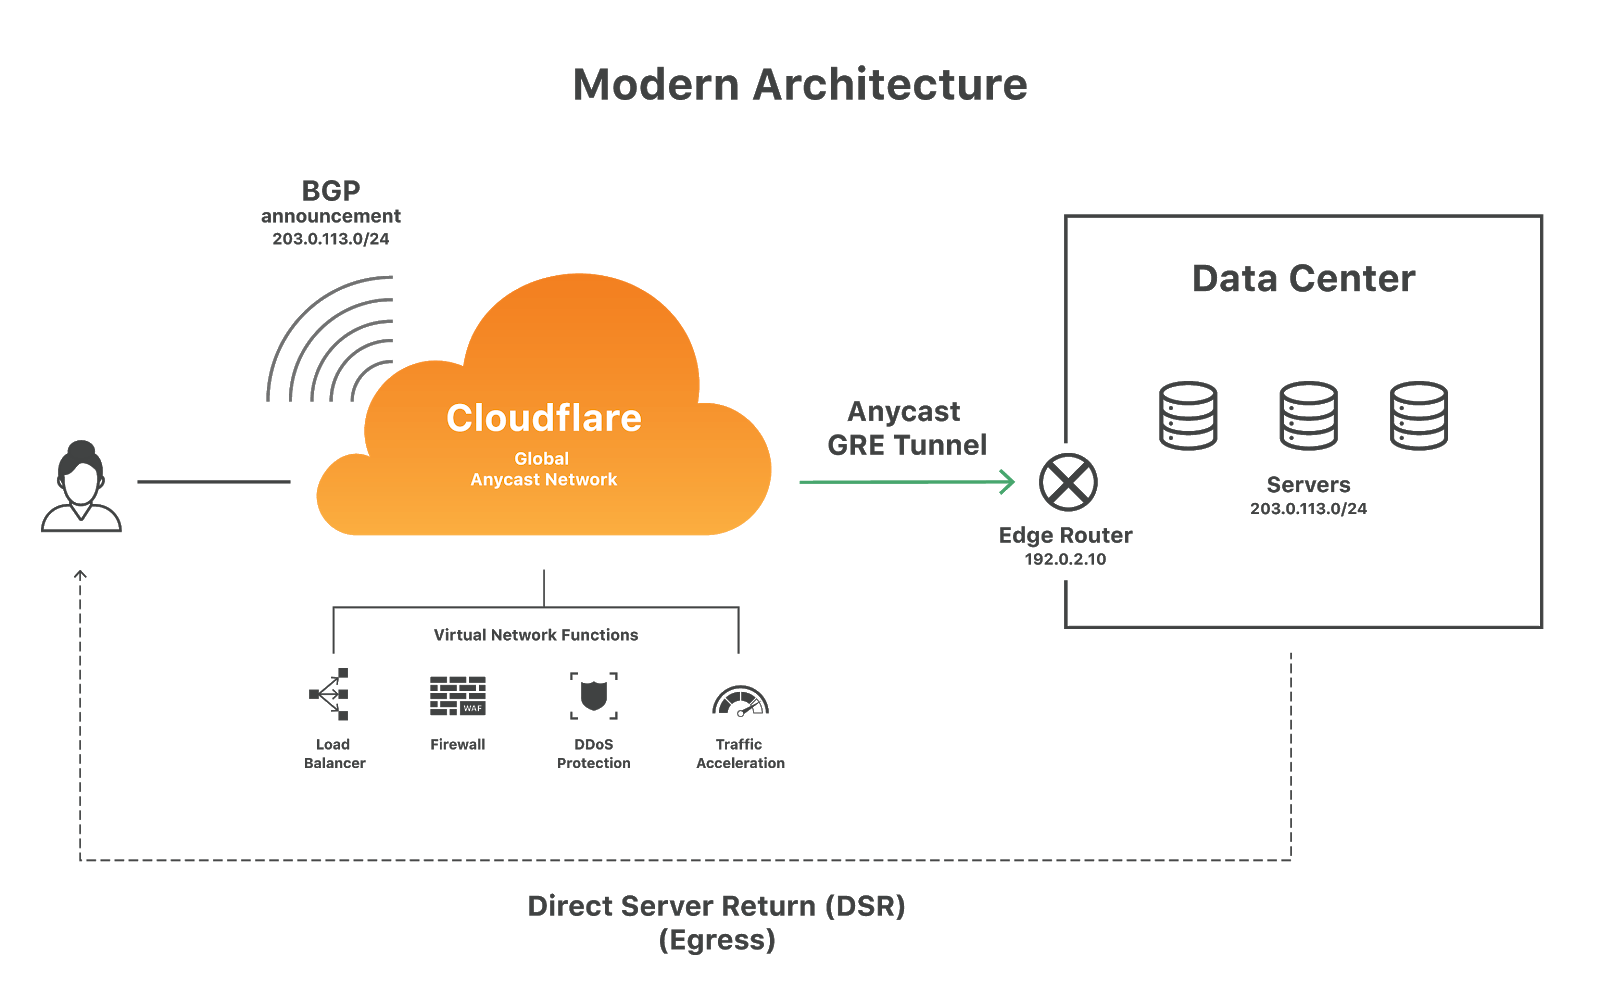 Cloudflare network - anycast